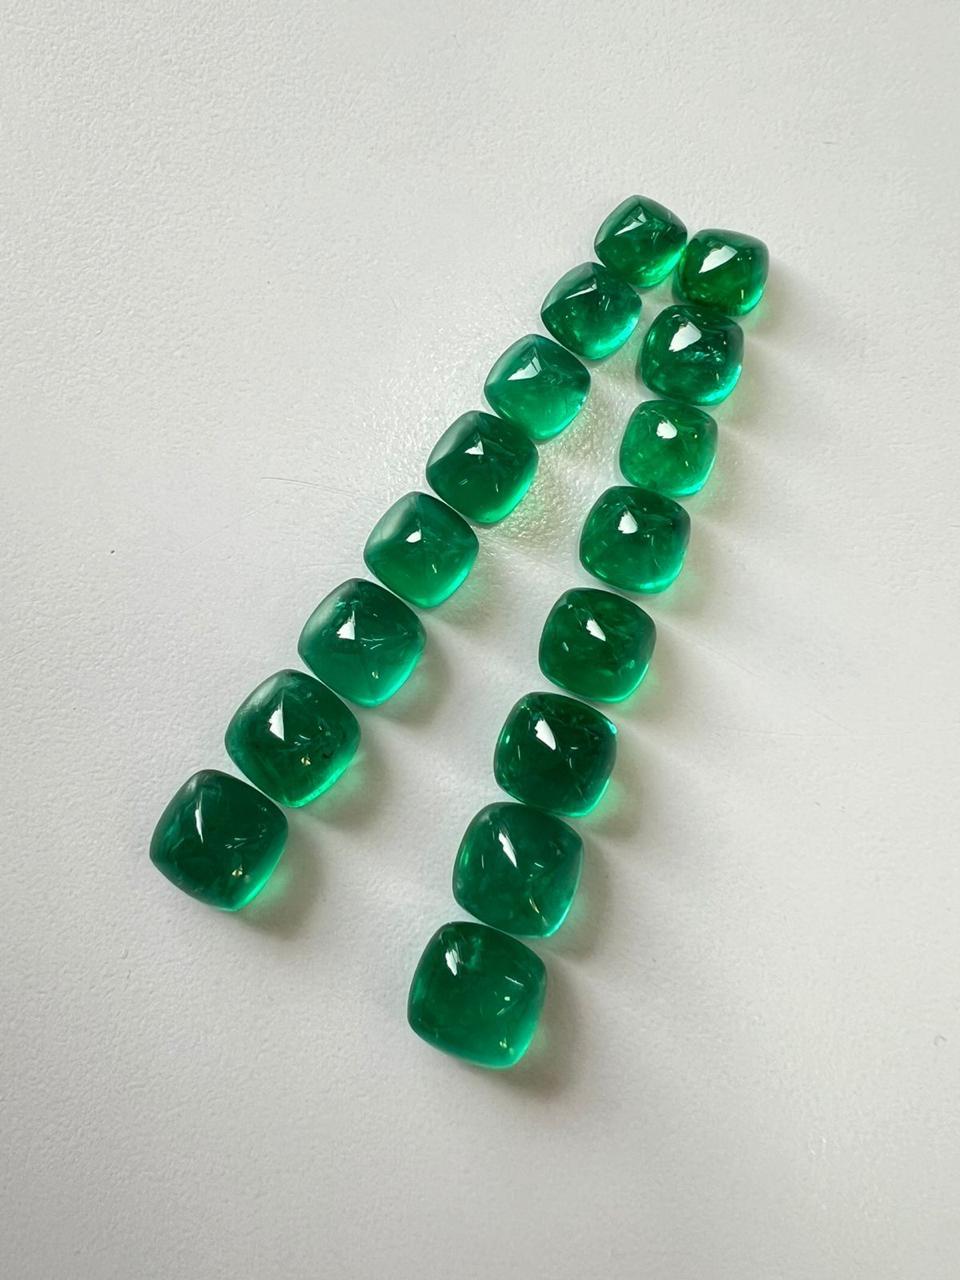 59.30 Carats Zambian Emerald Sugarloaf Cabochon Lot Top Quality Natural Gemstone In New Condition For Sale In Jaipur, RJ